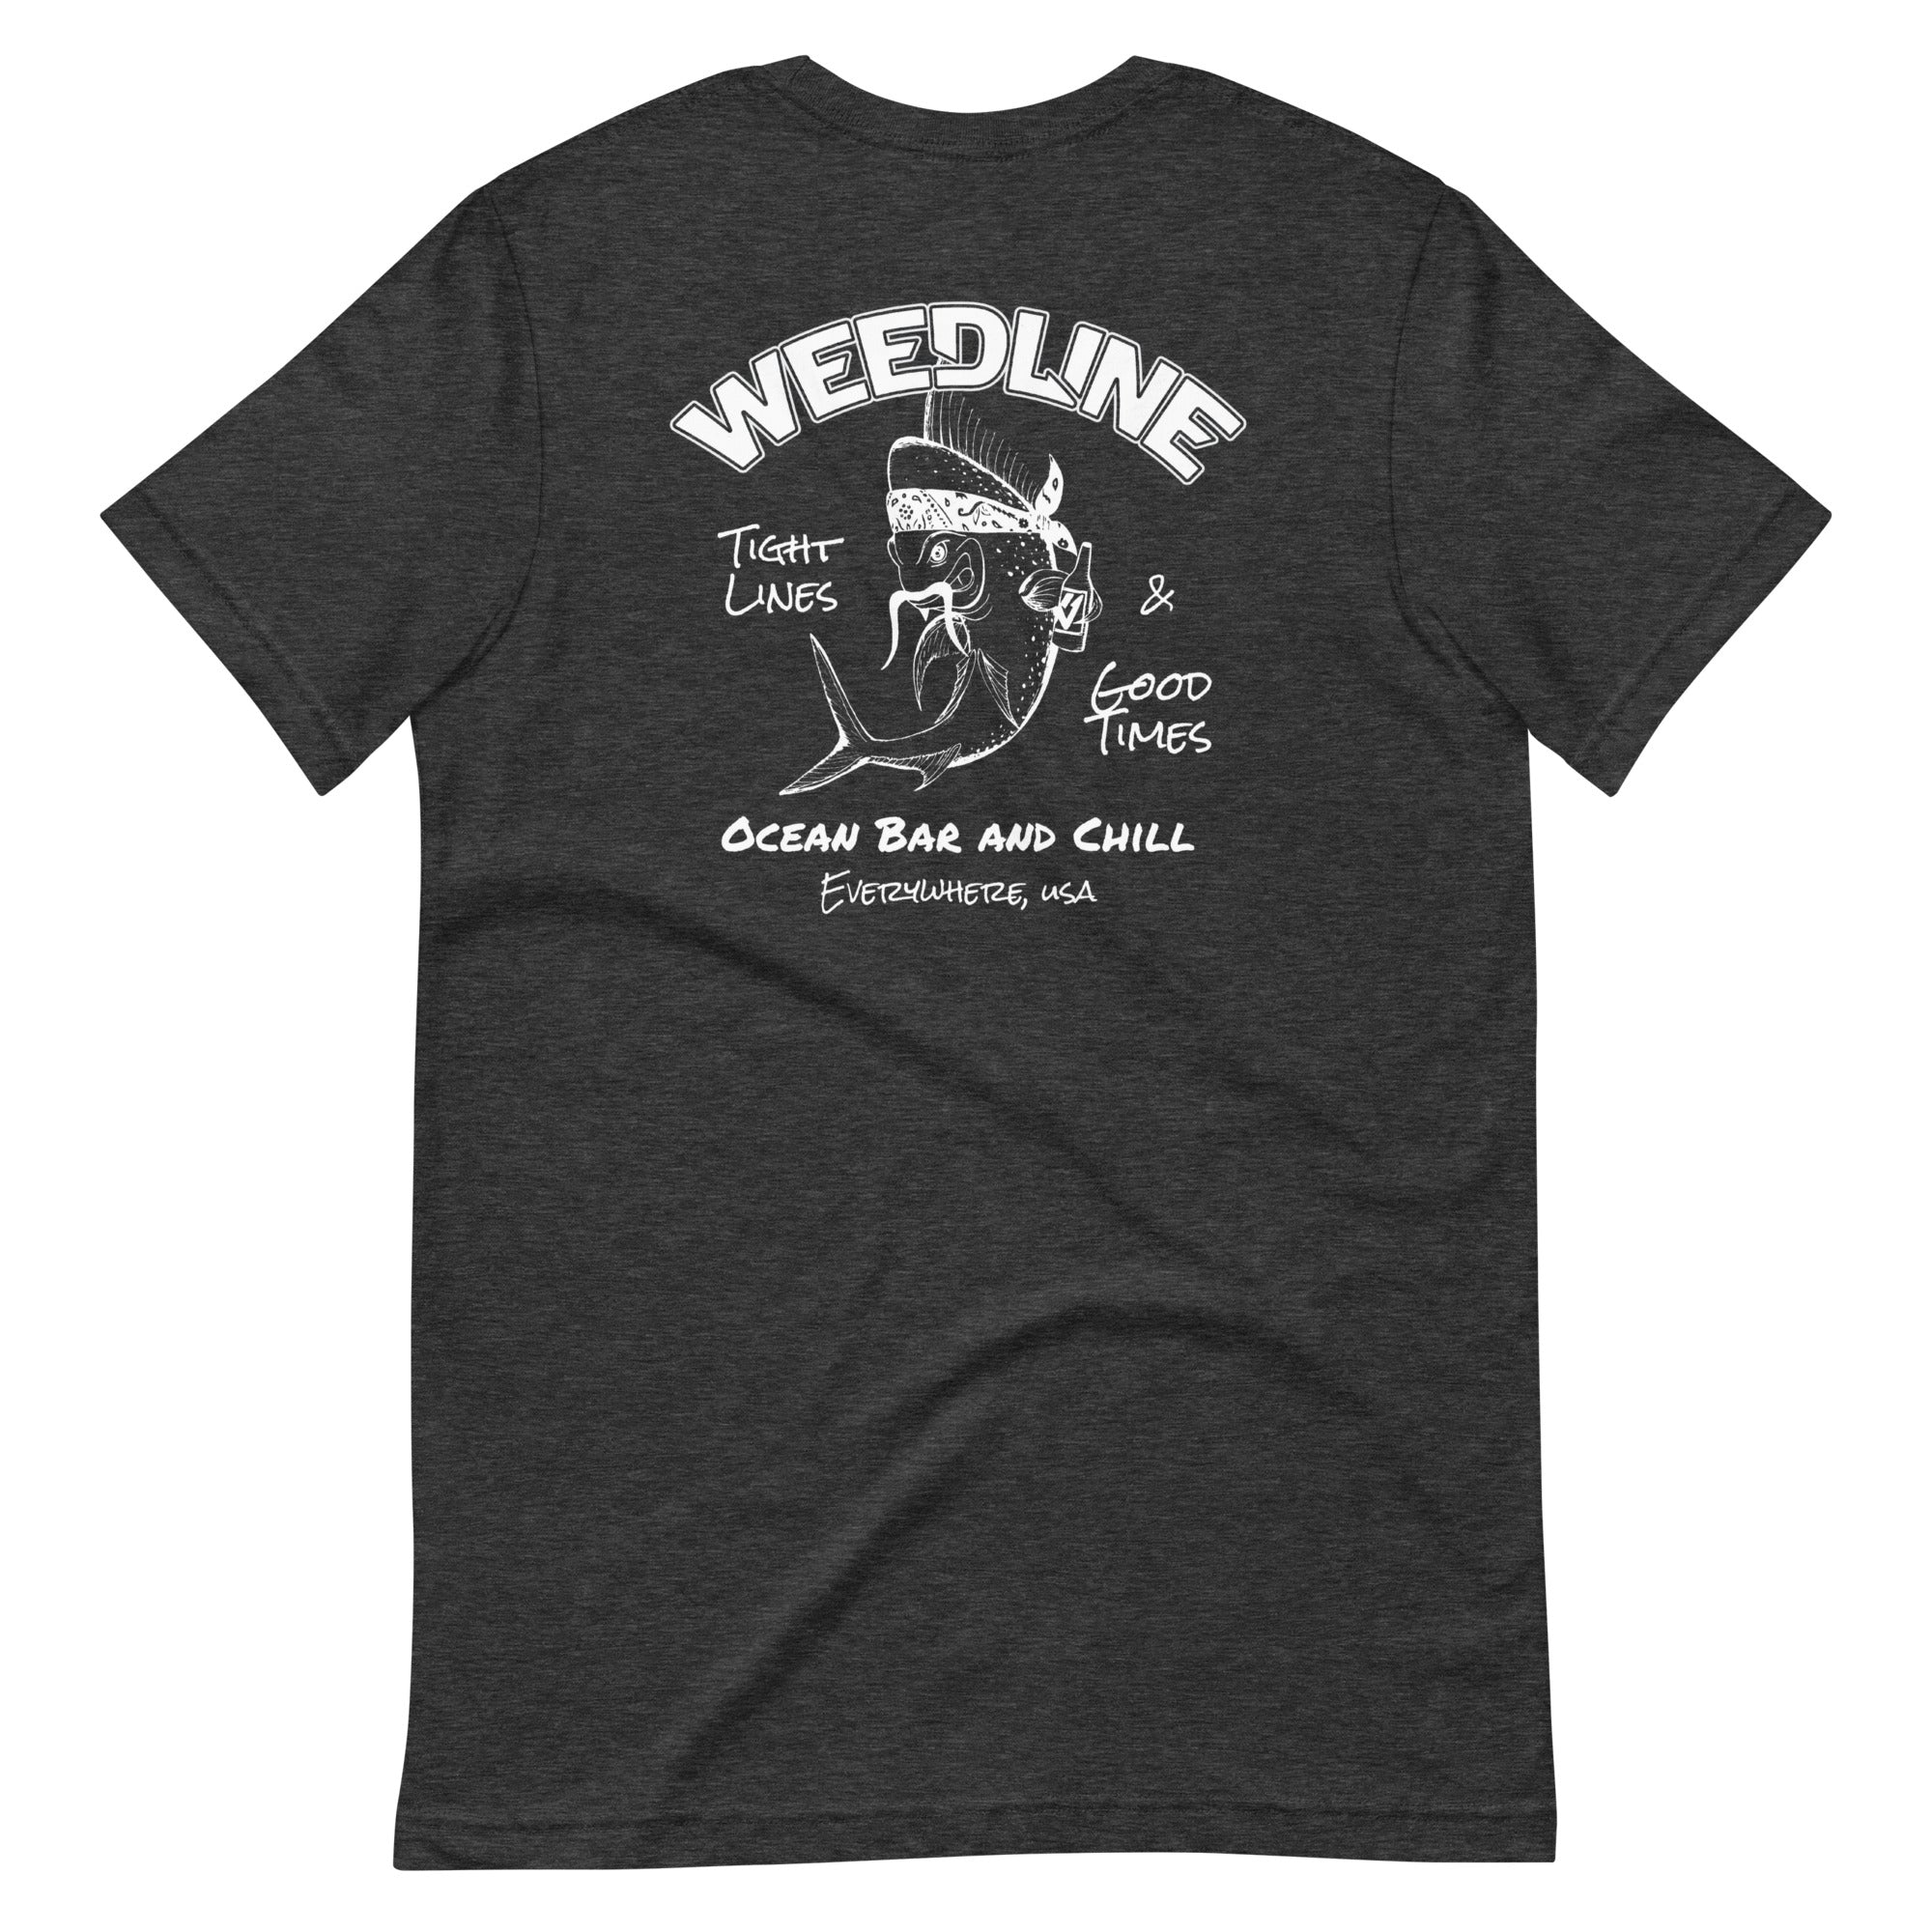 Weedline "Ocean Bar and Chill"